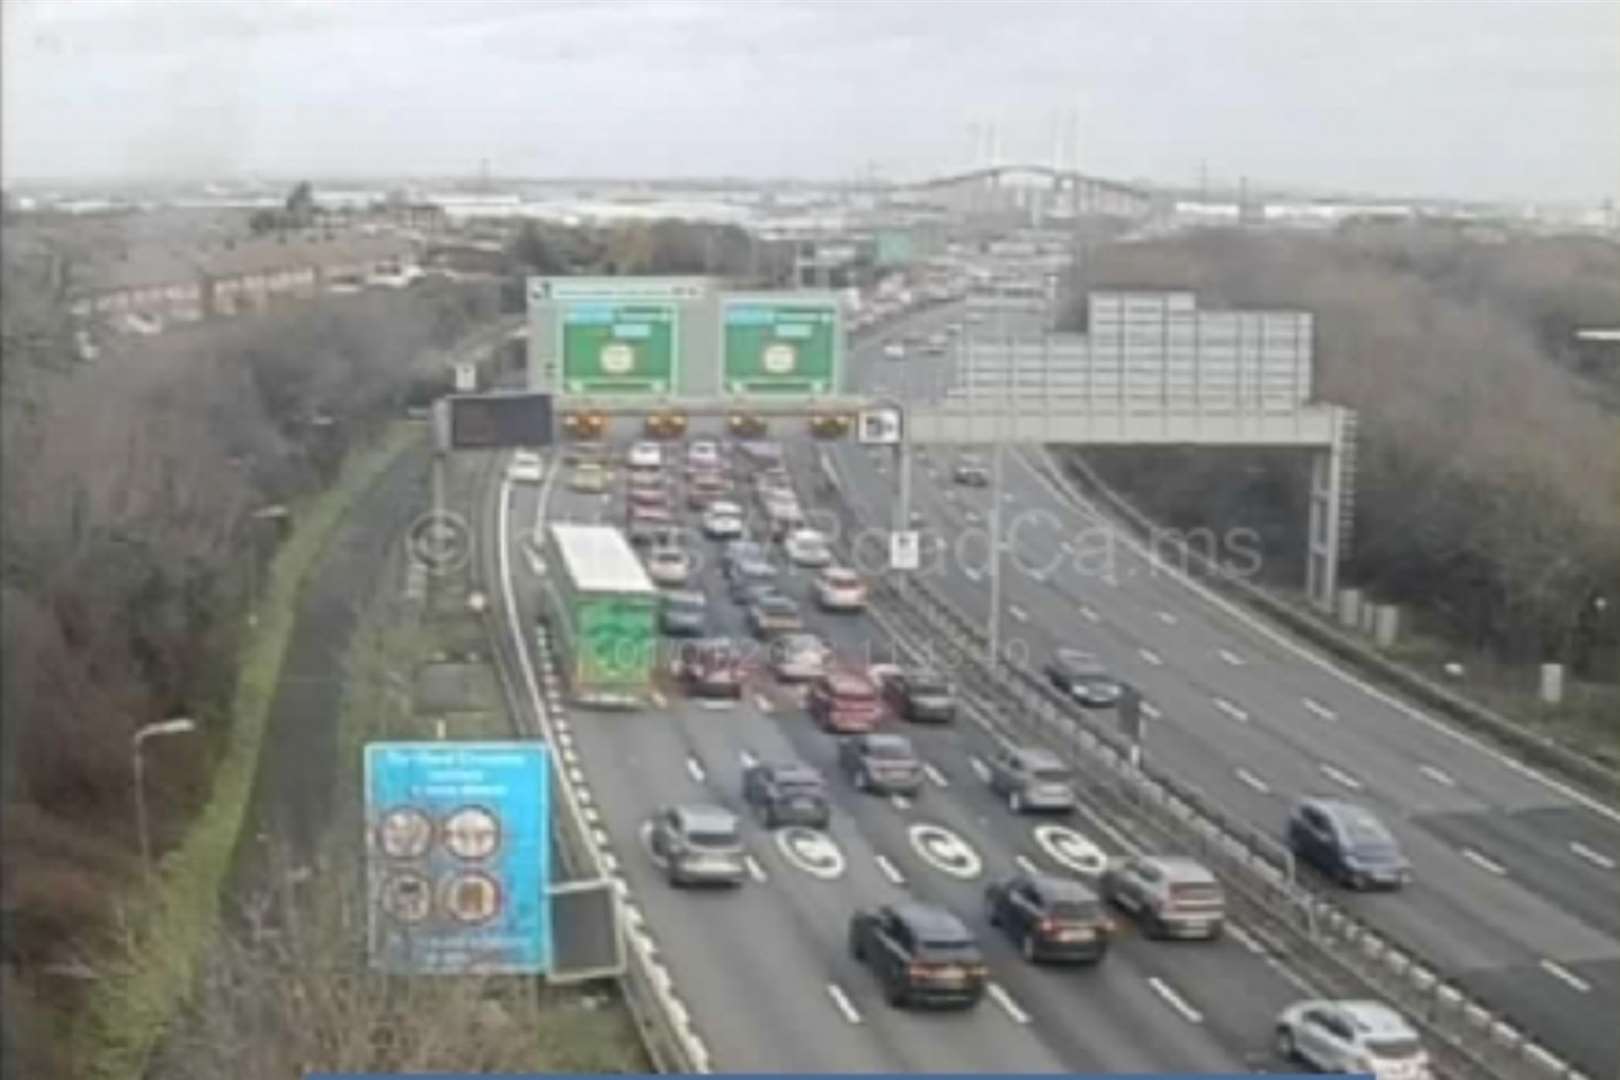 Traffic is building up on the M25 near the Dartford Crossing. Photo: National Highways